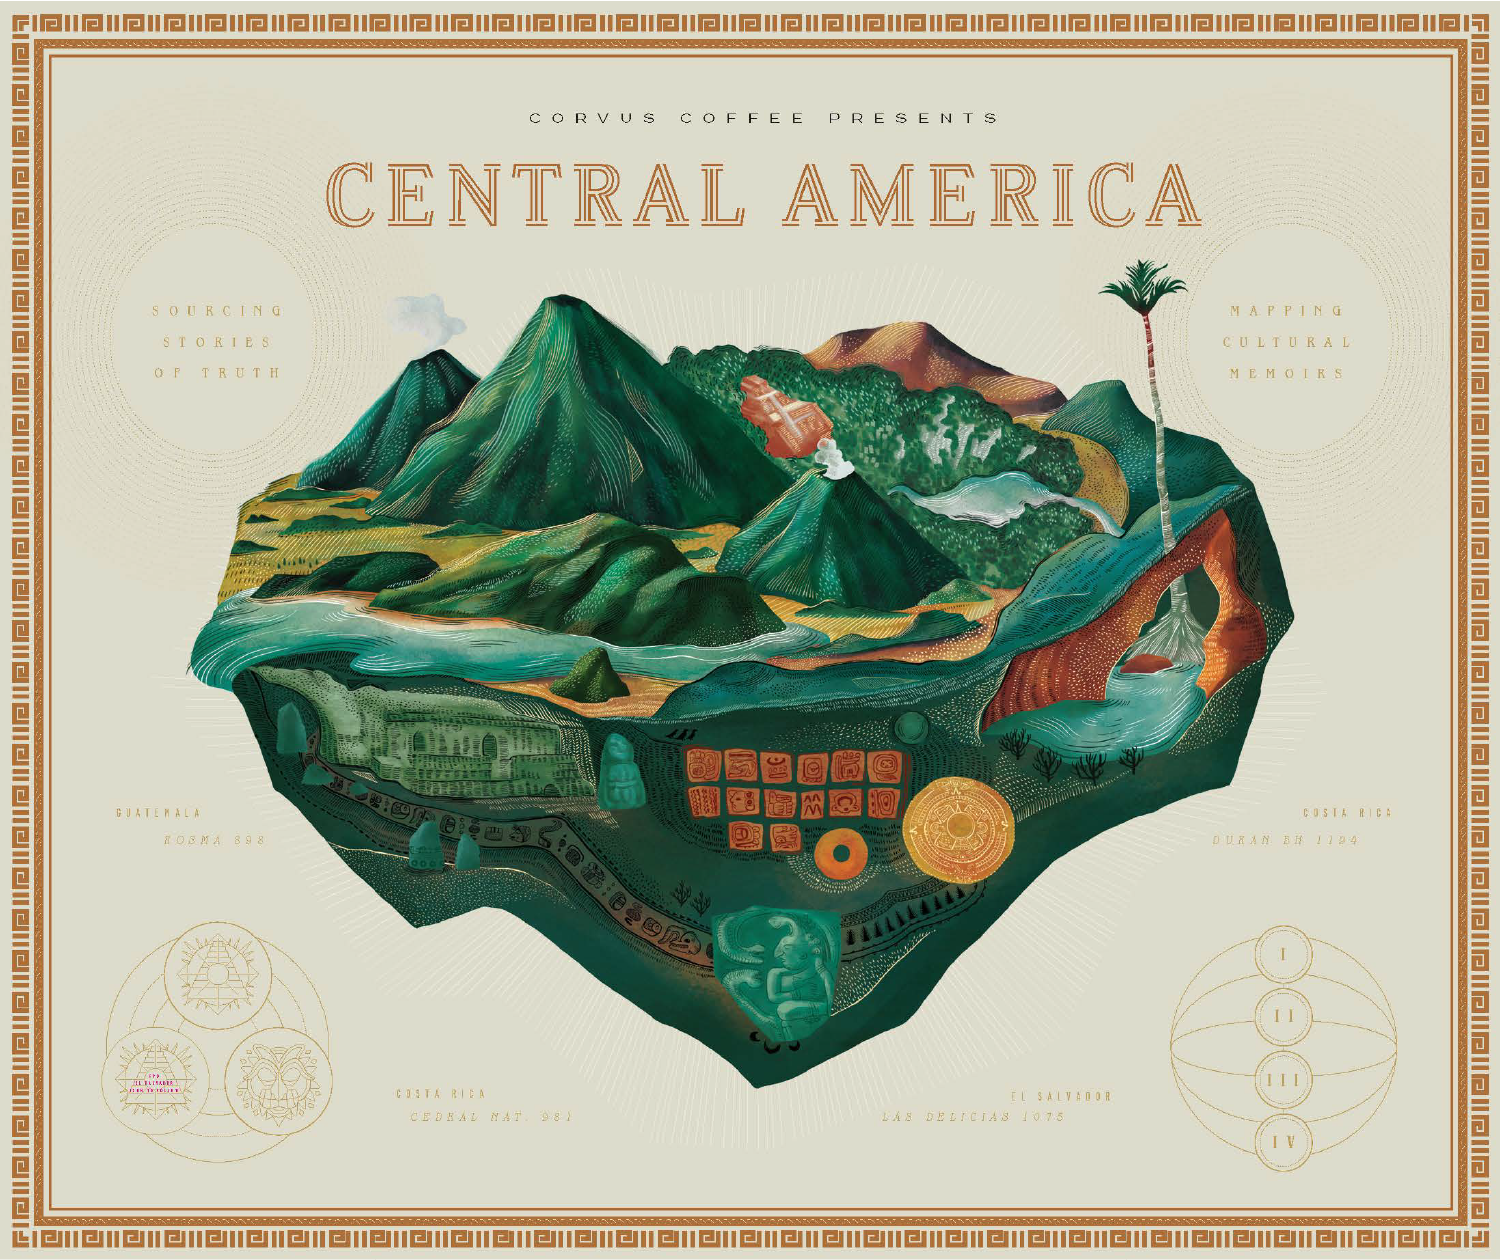 New subscription series - Central America